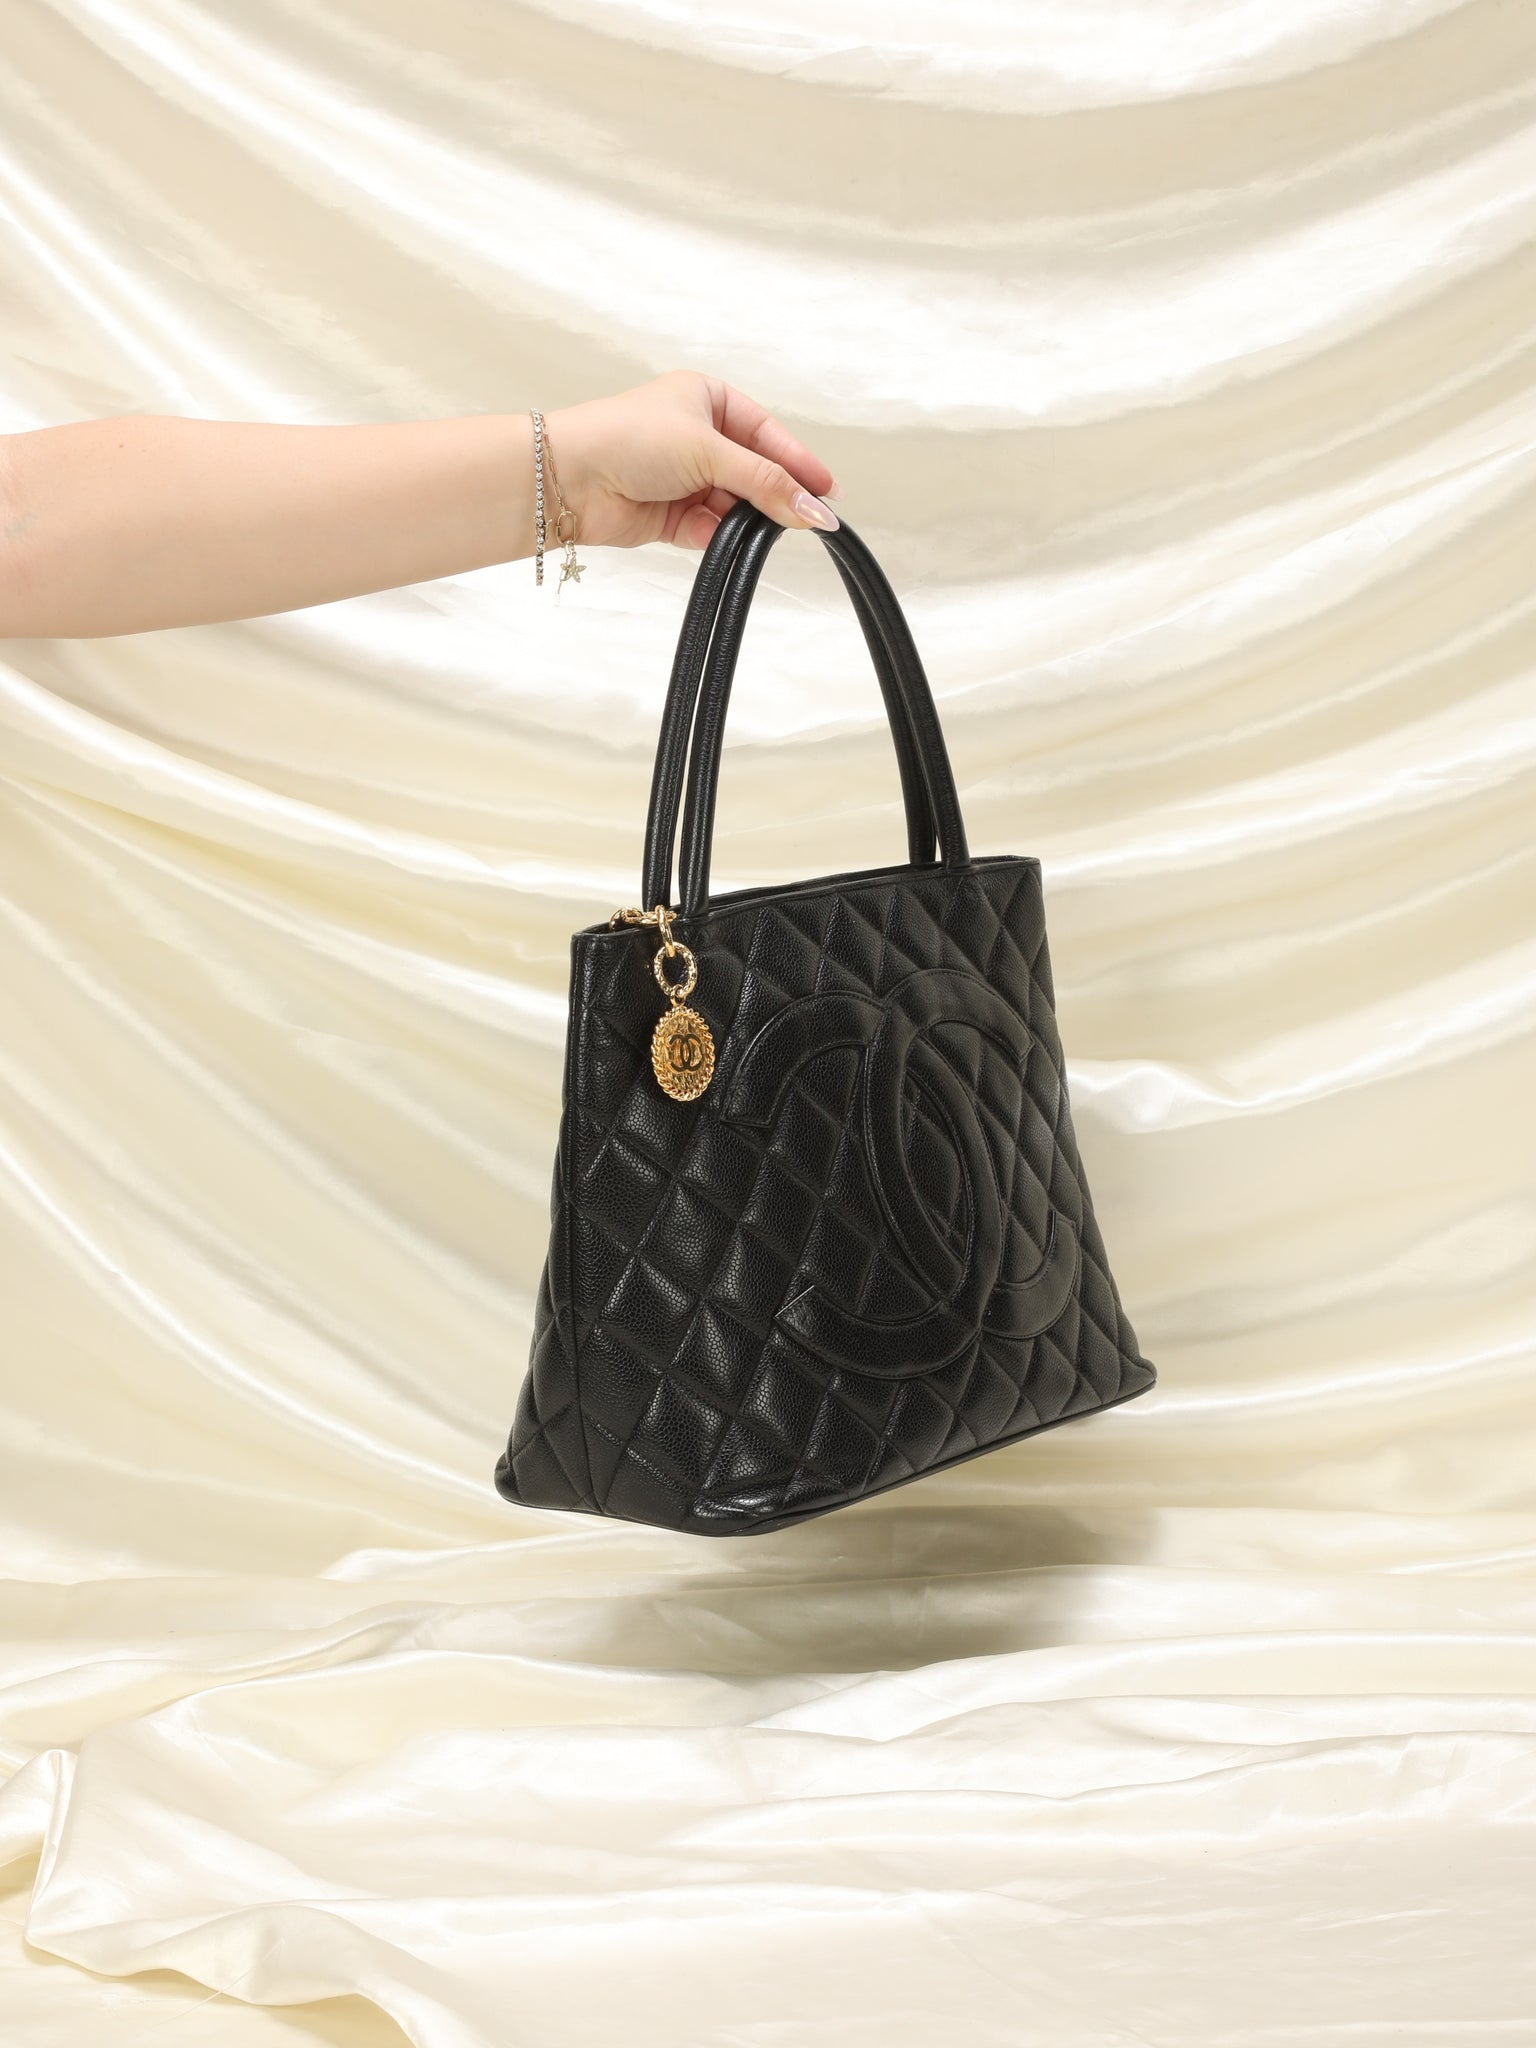 CHANEL, Bags, Chanel Black Quilted Caviar Leather Medallion Tote Bag